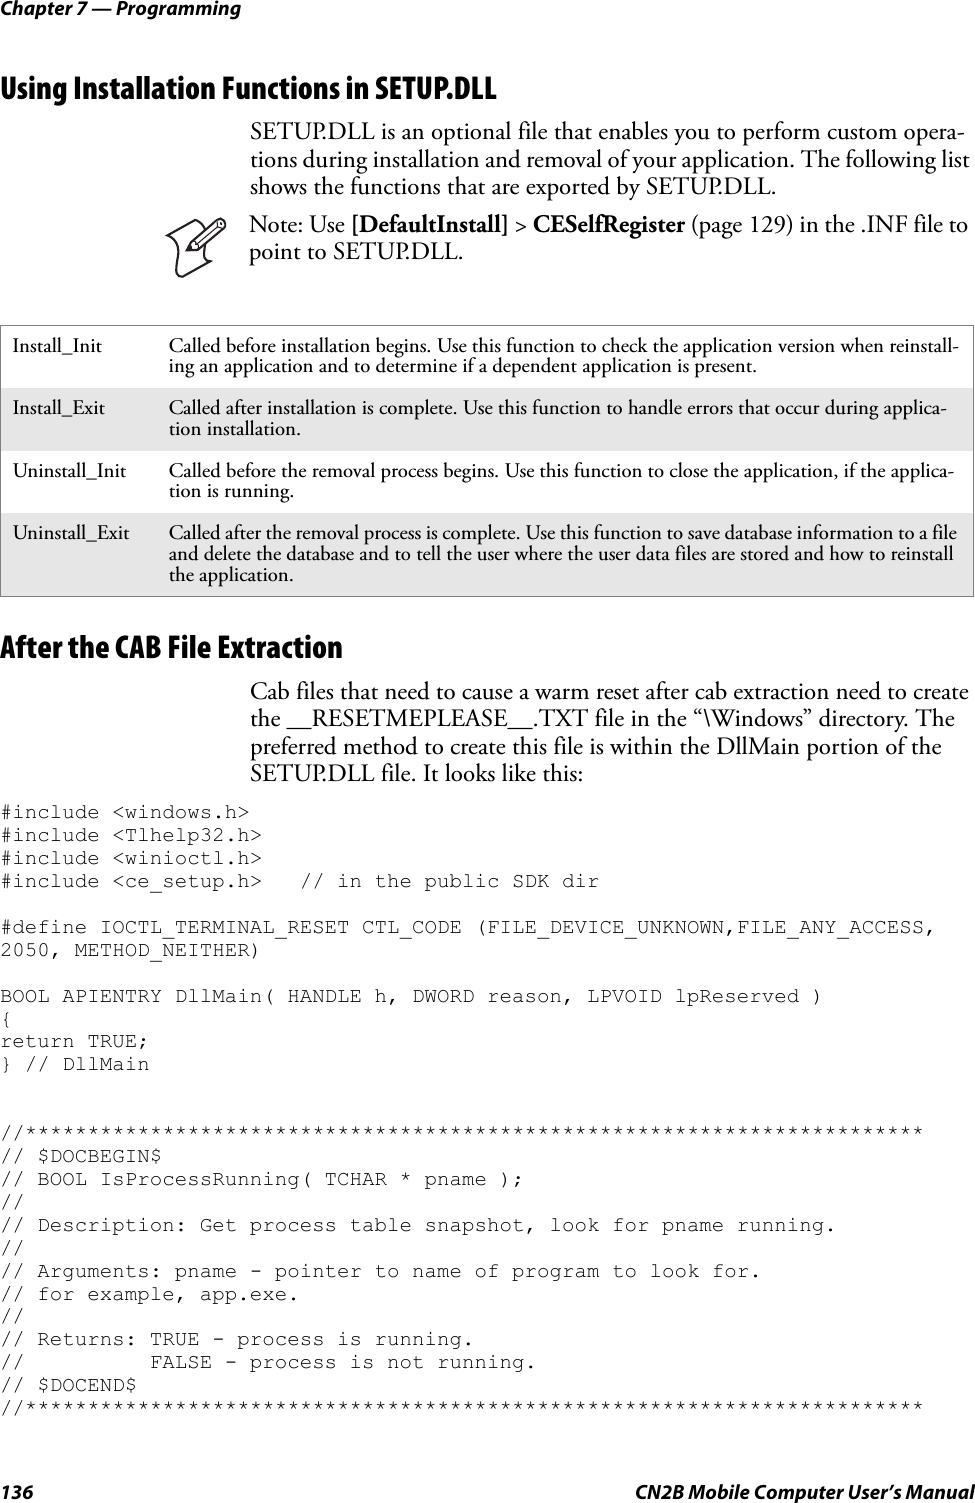 Chapter 7 — Programming136 CN2B Mobile Computer User’s ManualUsing Installation Functions in SETUP.DLLSETUP.DLL is an optional file that enables you to perform custom opera-tions during installation and removal of your application. The following list shows the functions that are exported by SETUP.DLL.After the CAB File ExtractionCab files that need to cause a warm reset after cab extraction need to create the __RESETMEPLEASE__.TXT file in the “\Windows” directory. The preferred method to create this file is within the DllMain portion of the SETUP.DLL file. It looks like this:#include &lt;windows.h&gt;#include &lt;Tlhelp32.h&gt;#include &lt;winioctl.h&gt;#include &lt;ce_setup.h&gt;   // in the public SDK dir#define IOCTL_TERMINAL_RESET CTL_CODE (FILE_DEVICE_UNKNOWN,FILE_ANY_ACCESS, 2050, METHOD_NEITHER)BOOL APIENTRY DllMain( HANDLE h, DWORD reason, LPVOID lpReserved ){return TRUE;} // DllMain//************************************************************************// $DOCBEGIN$// BOOL IsProcessRunning( TCHAR * pname );//// Description: Get process table snapshot, look for pname running.//// Arguments: pname - pointer to name of program to look for.// for example, app.exe.//// Returns: TRUE - process is running.//          FALSE - process is not running.// $DOCEND$//************************************************************************Install_Init Called before installation begins. Use this function to check the application version when reinstall-ing an application and to determine if a dependent application is present.Install_Exit Called after installation is complete. Use this function to handle errors that occur during applica-tion installation.Uninstall_Init Called before the removal process begins. Use this function to close the application, if the applica-tion is running.Uninstall_Exit Called after the removal process is complete. Use this function to save database information to a file and delete the database and to tell the user where the user data files are stored and how to reinstall the application.Note: Use [DefaultInstall] &gt; CESelfRegister (page 129) in the .INF file to point to SETUP.DLL.